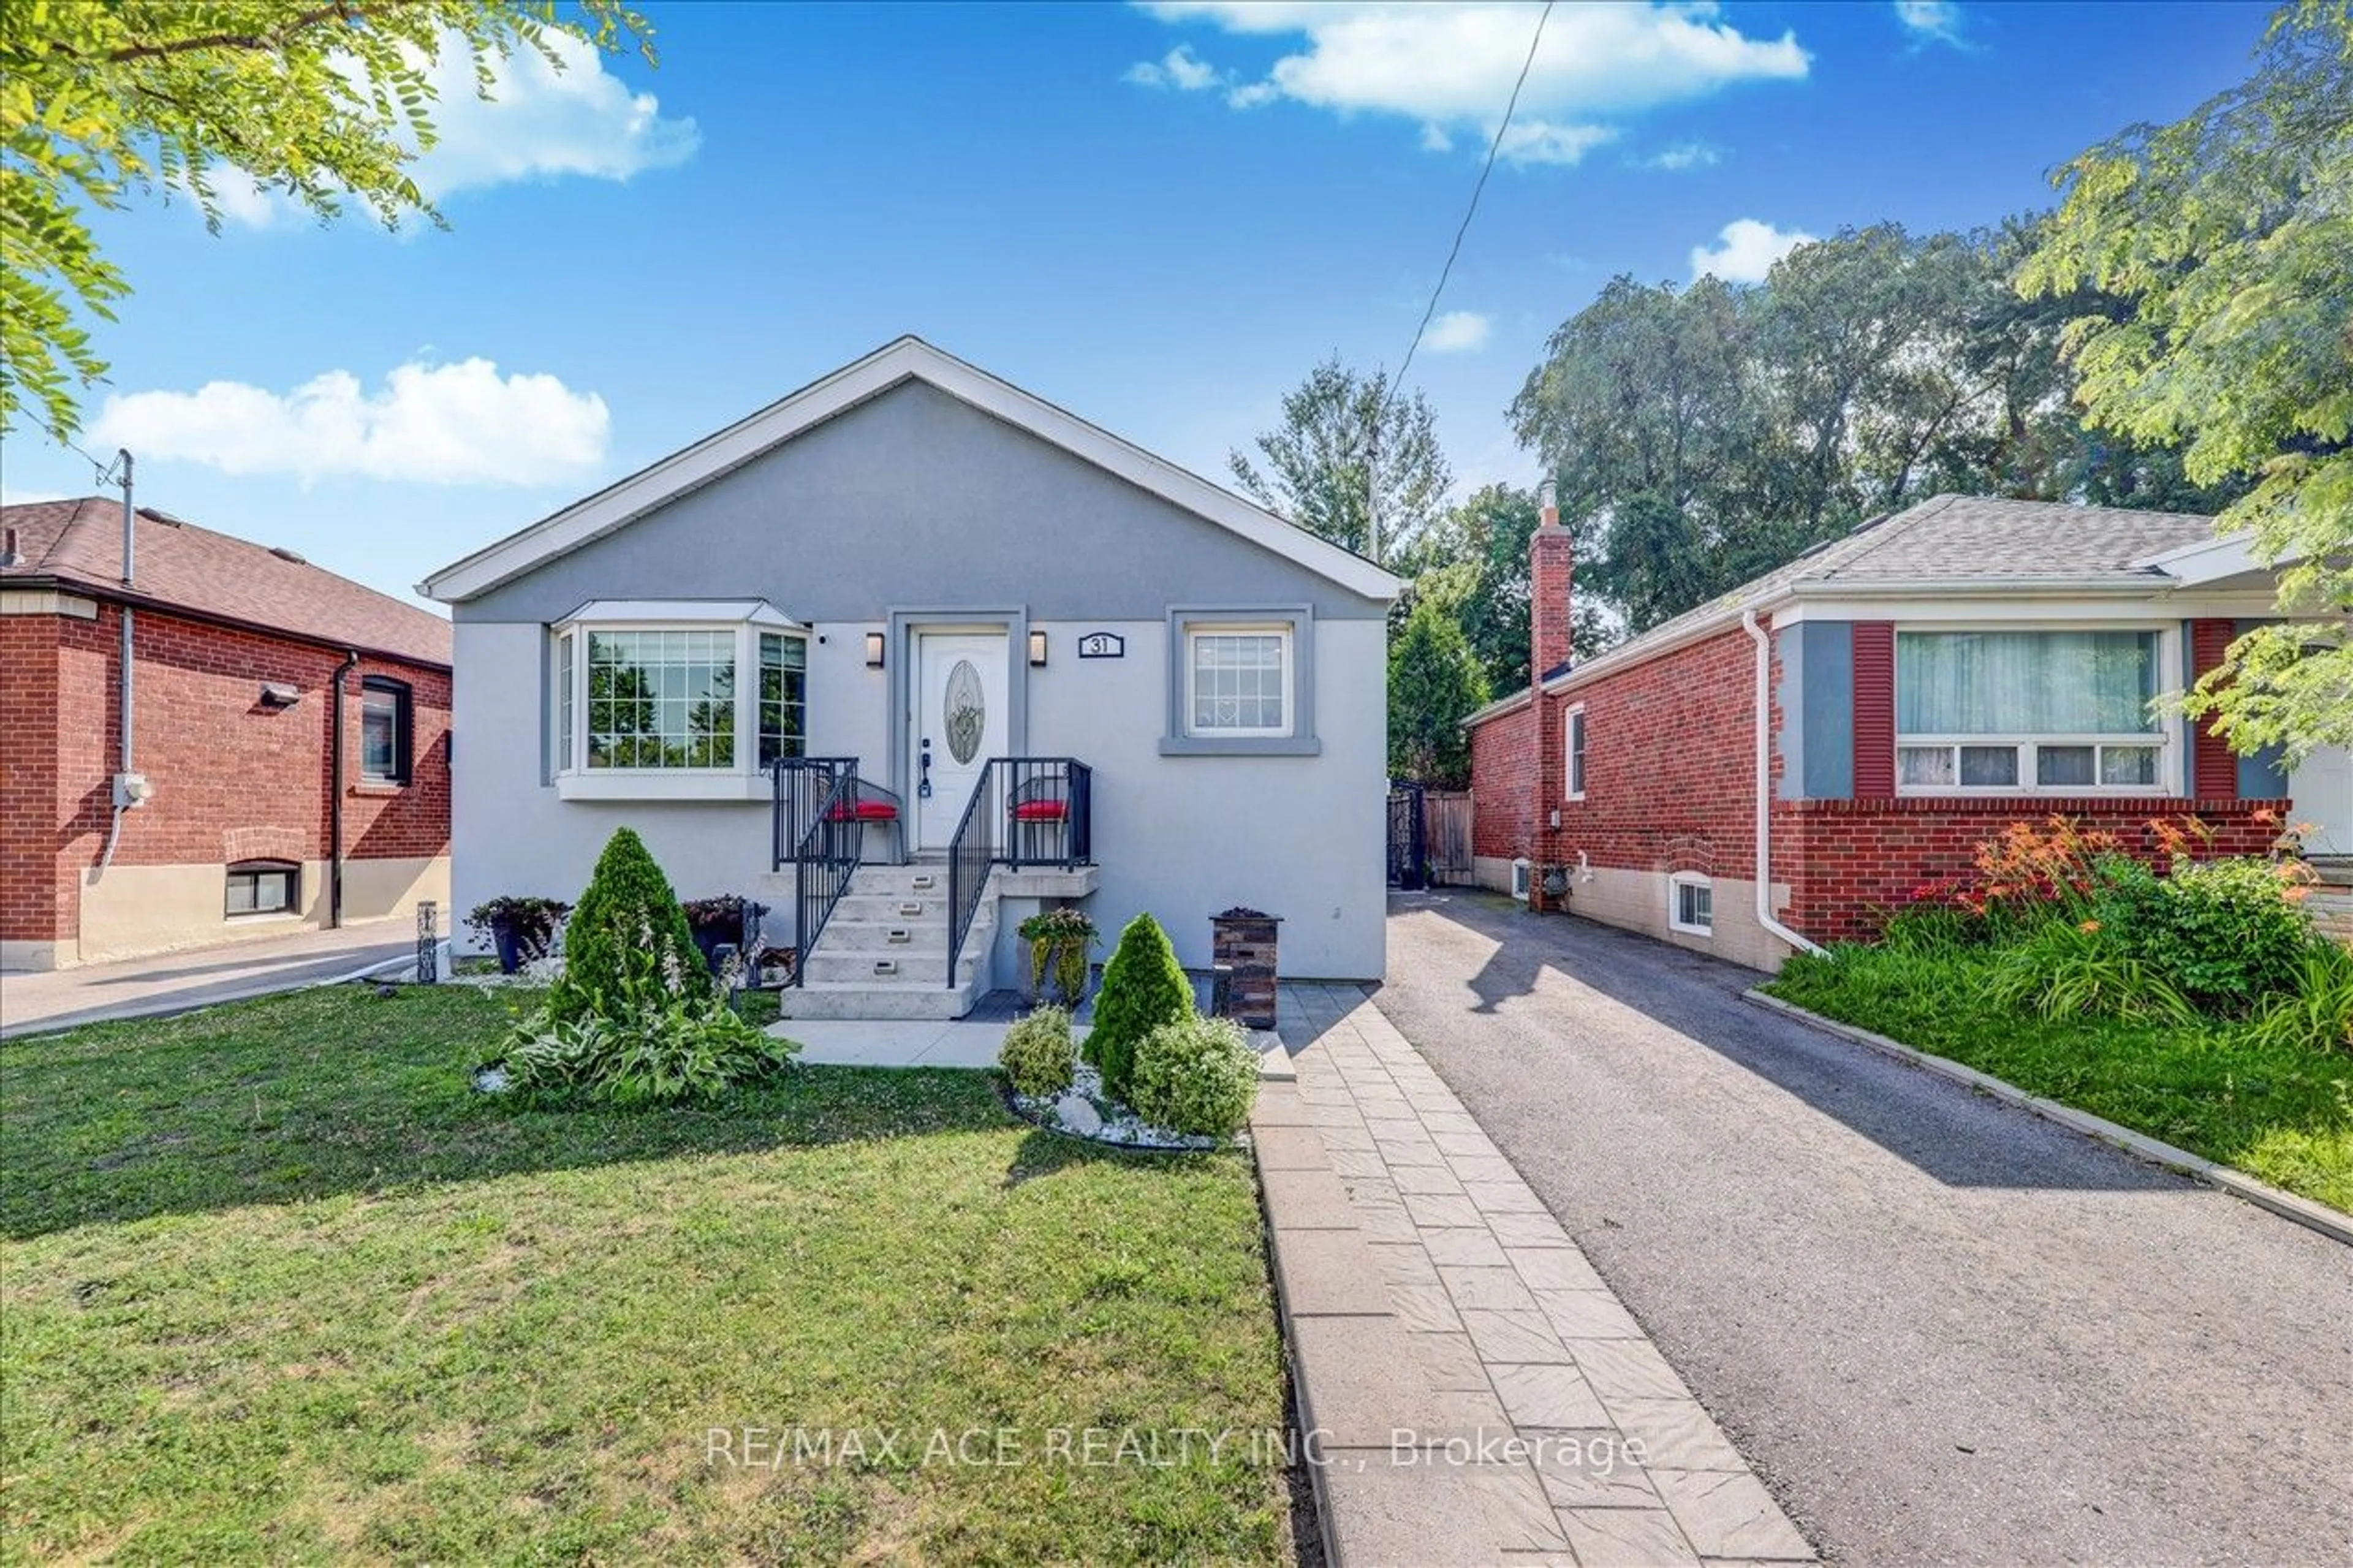 Frontside or backside of a home for 31 Lilian Dr, Toronto Ontario M1R 3W2